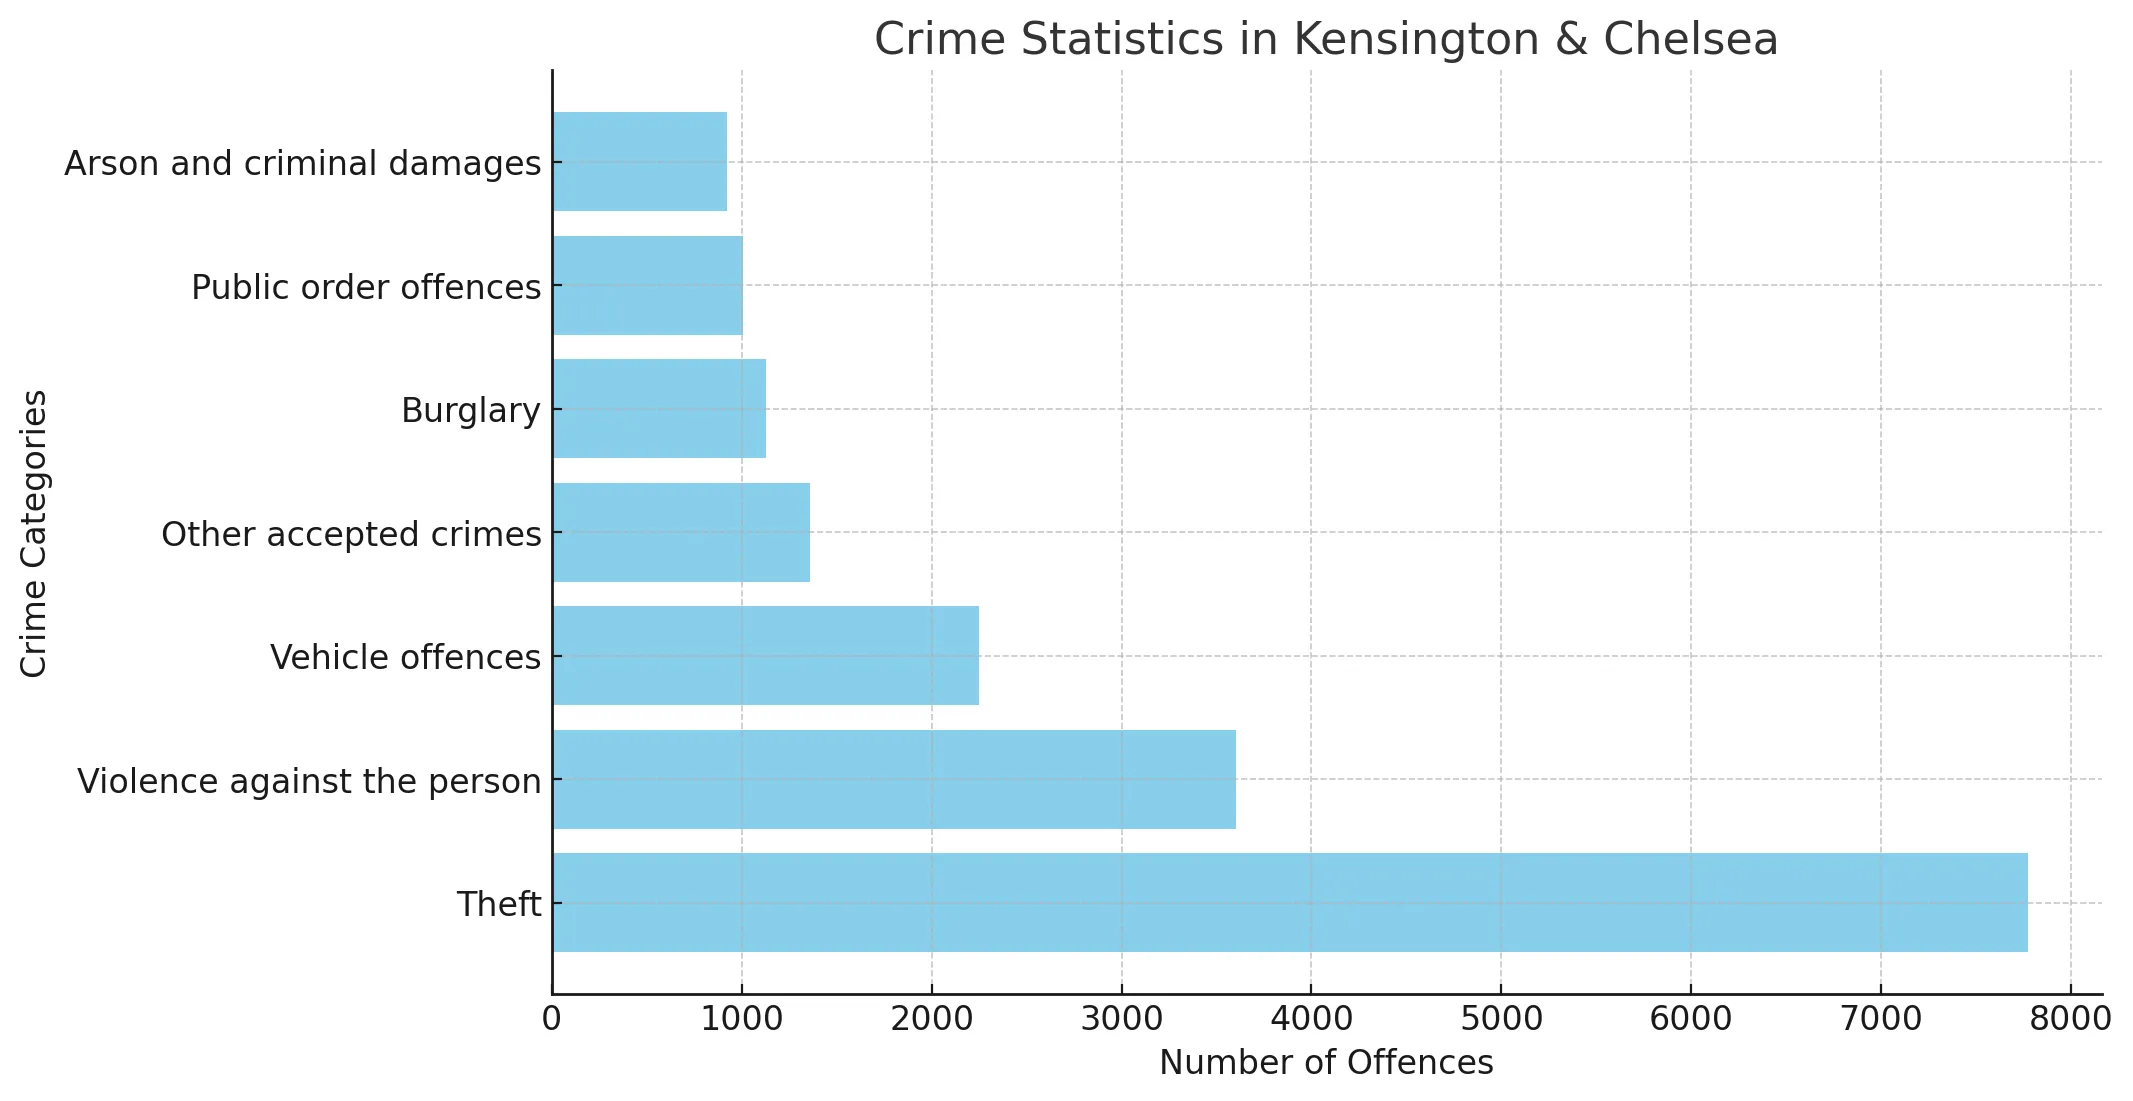 A horizontal bar chart depicting crime statistics in Kensington & Chelsea, one of the most dangerous areas in London, with theft being the most frequent crime.